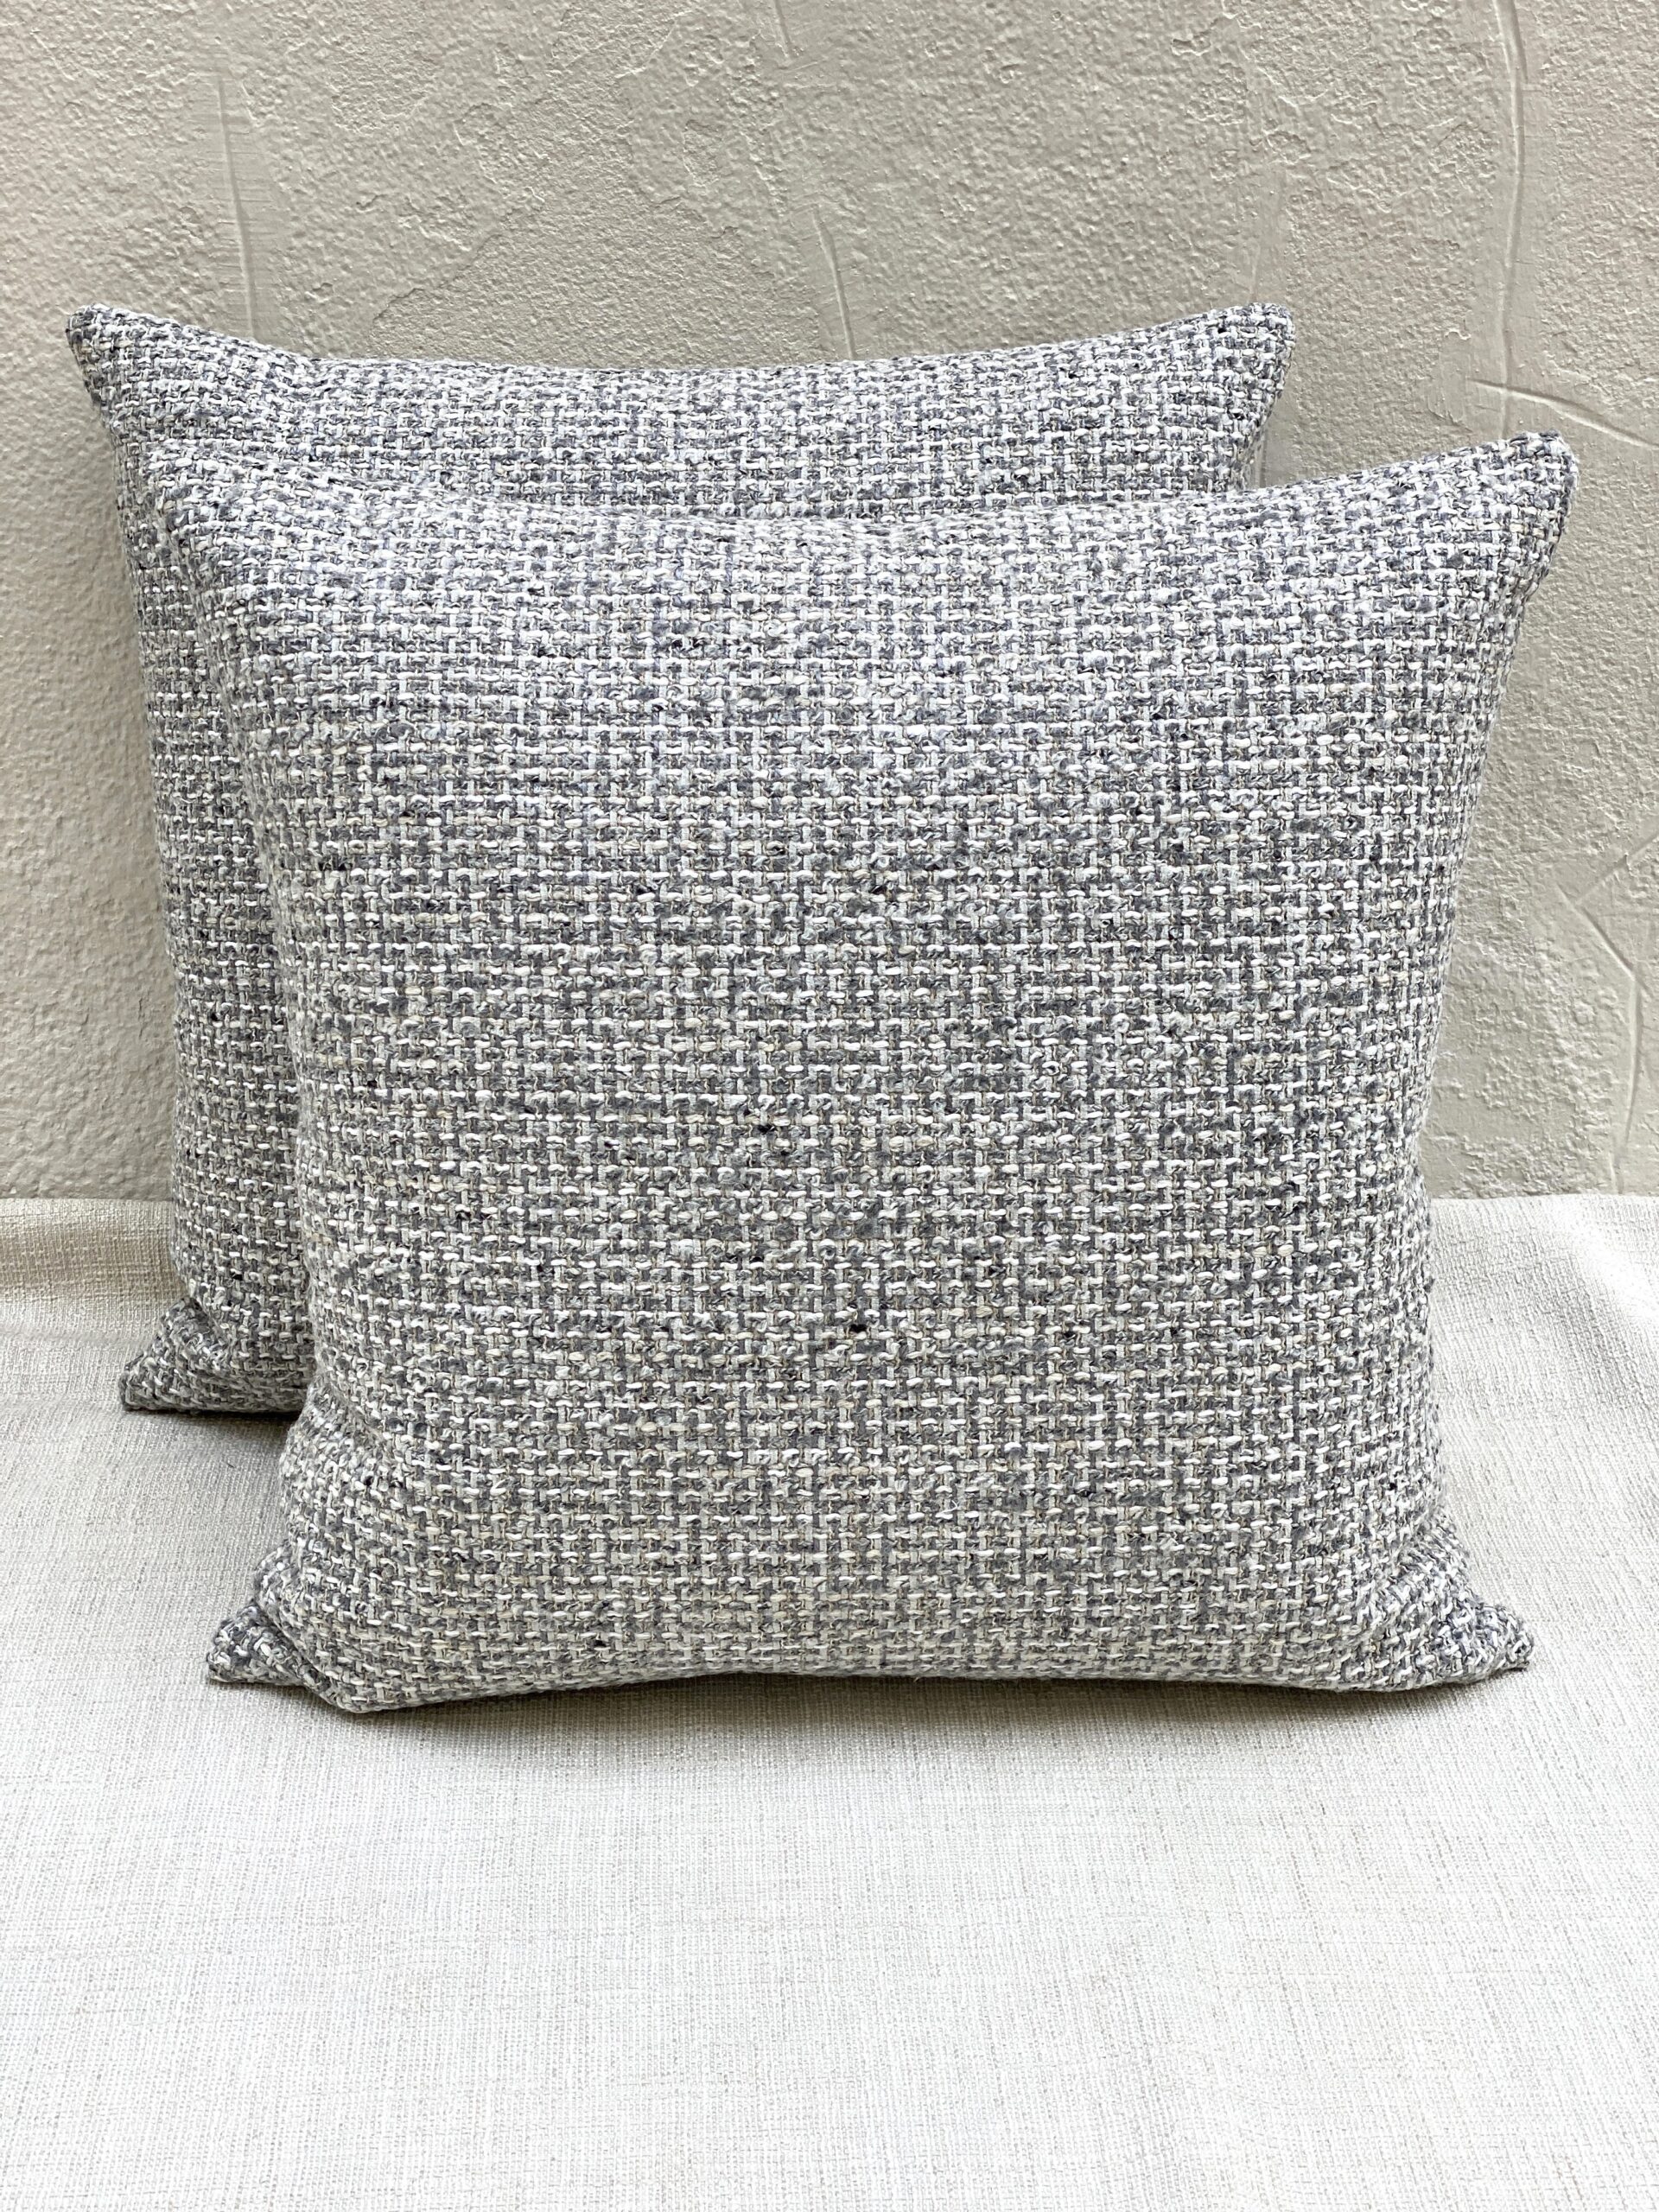 Holly Hunt Great Plains Coco Pillows